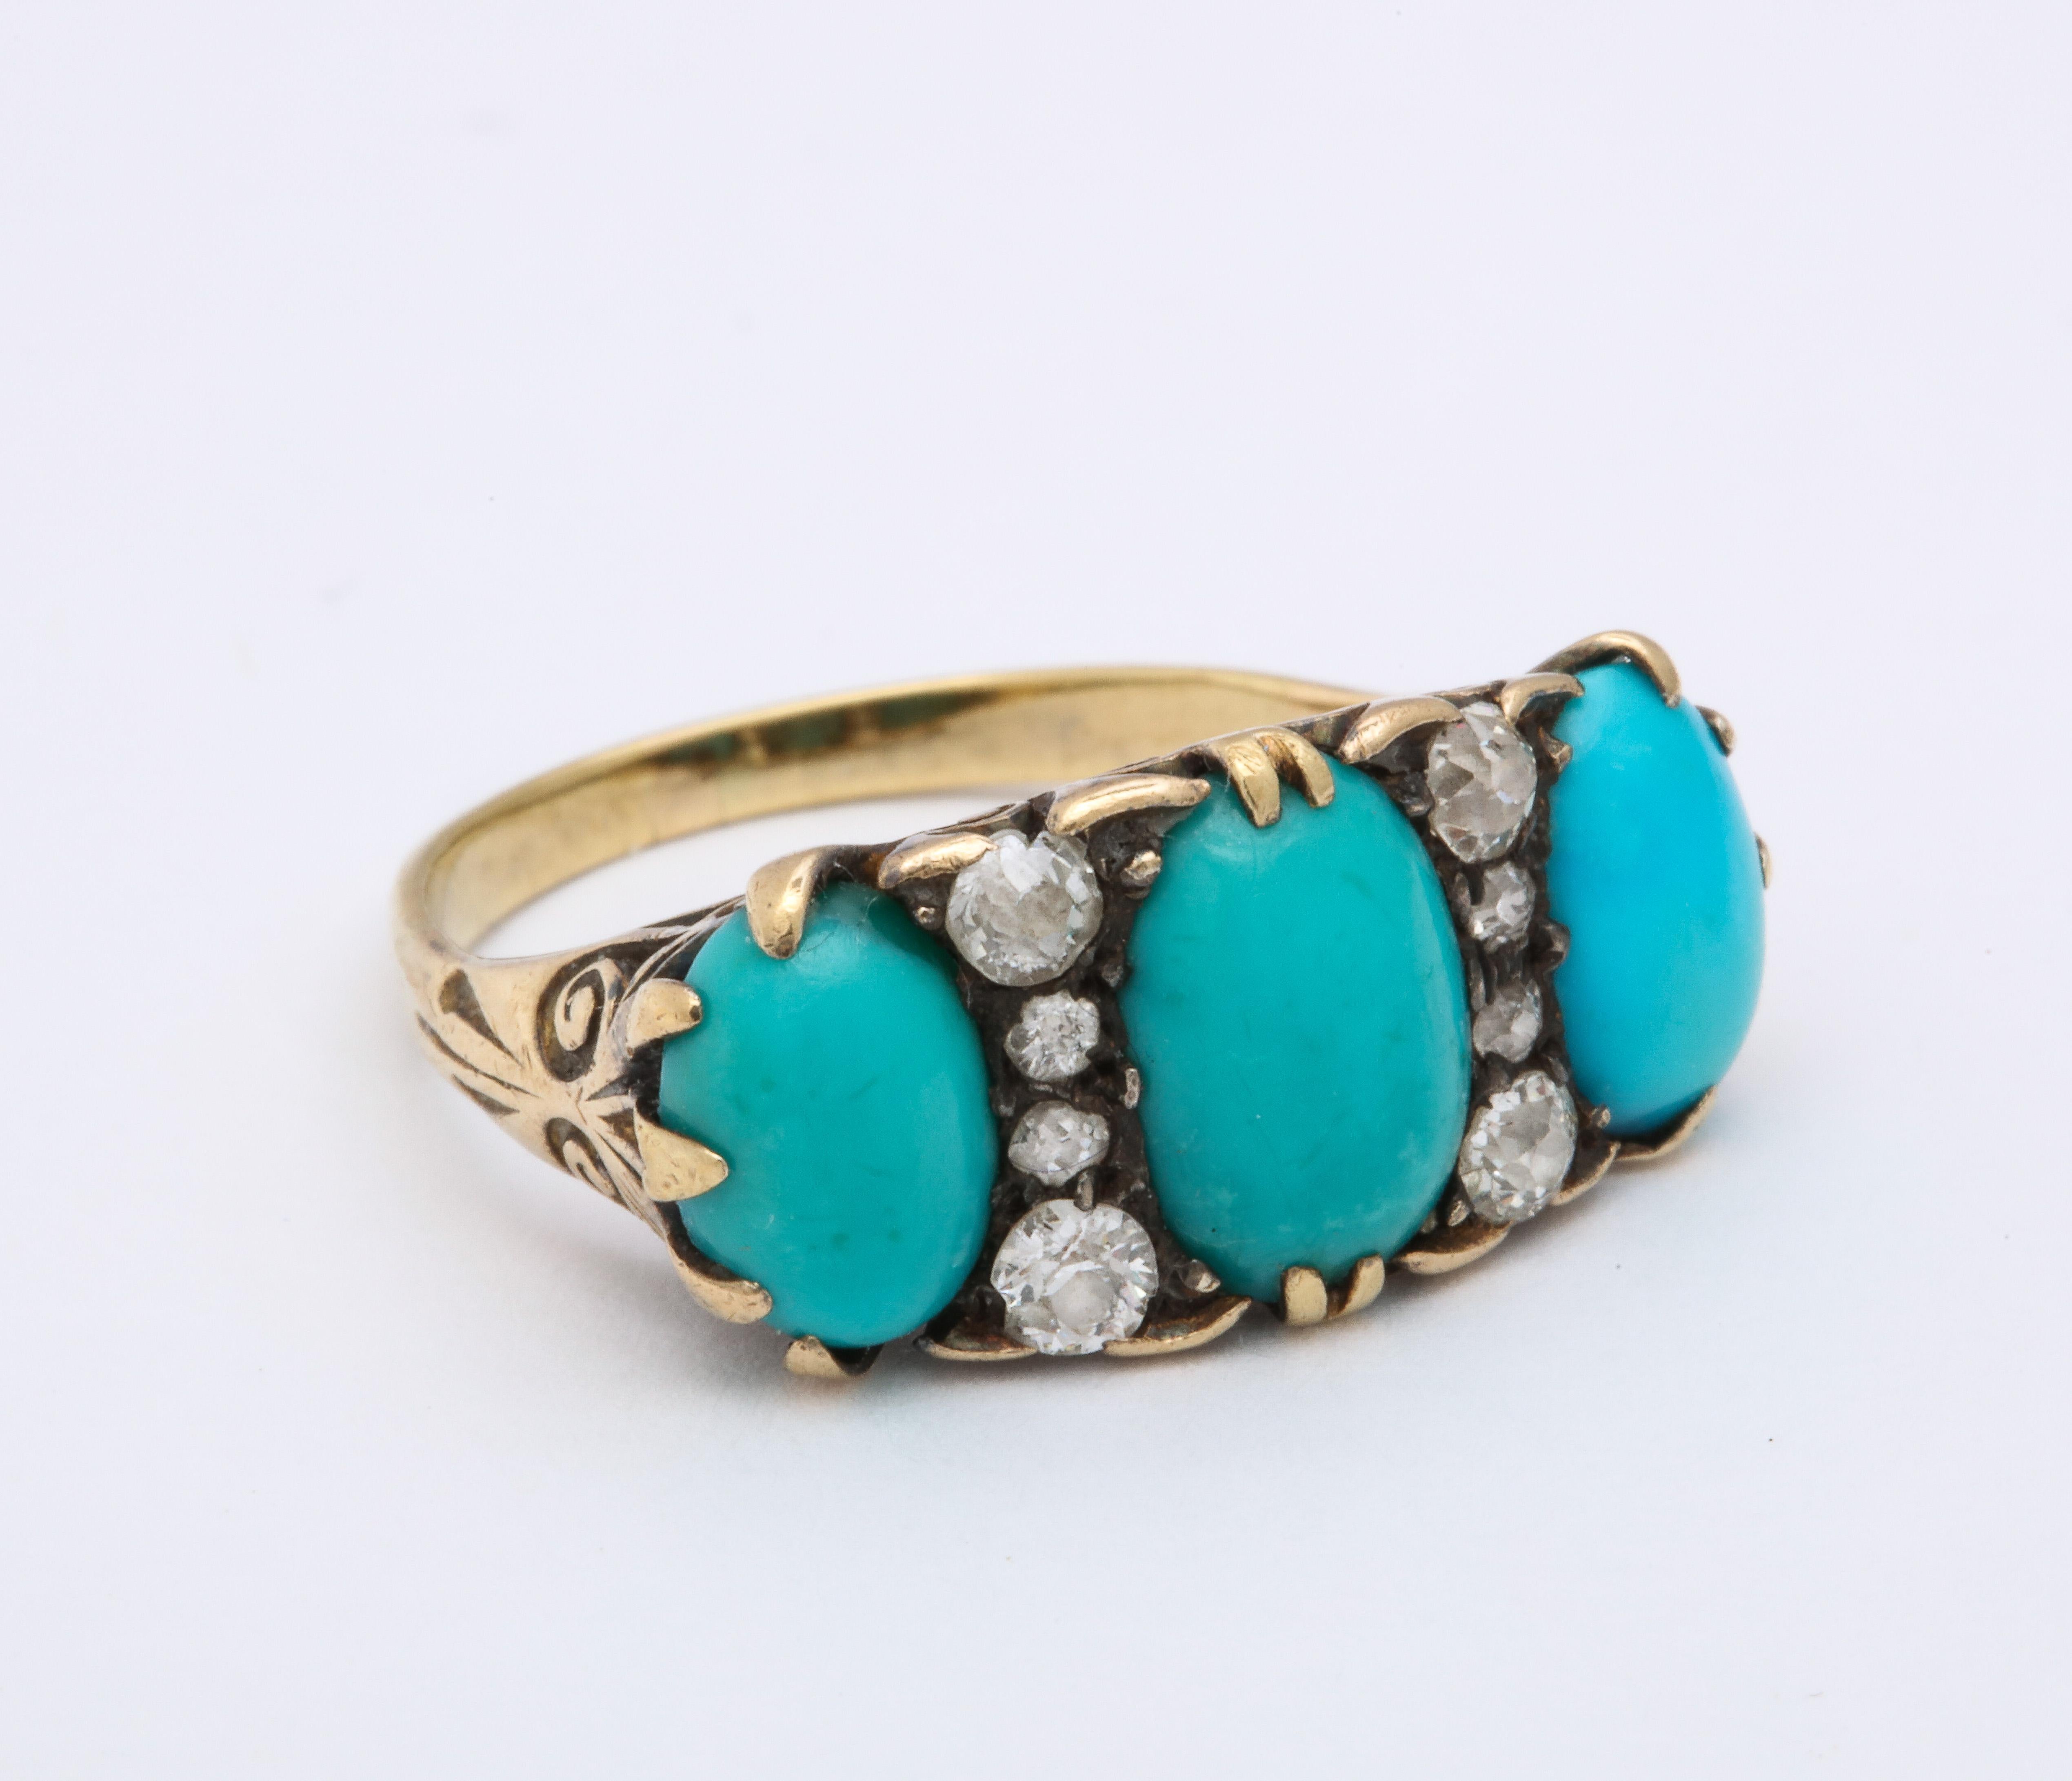 Old European Cut Antique Mid Victorian Turquoise and Diamond Ring